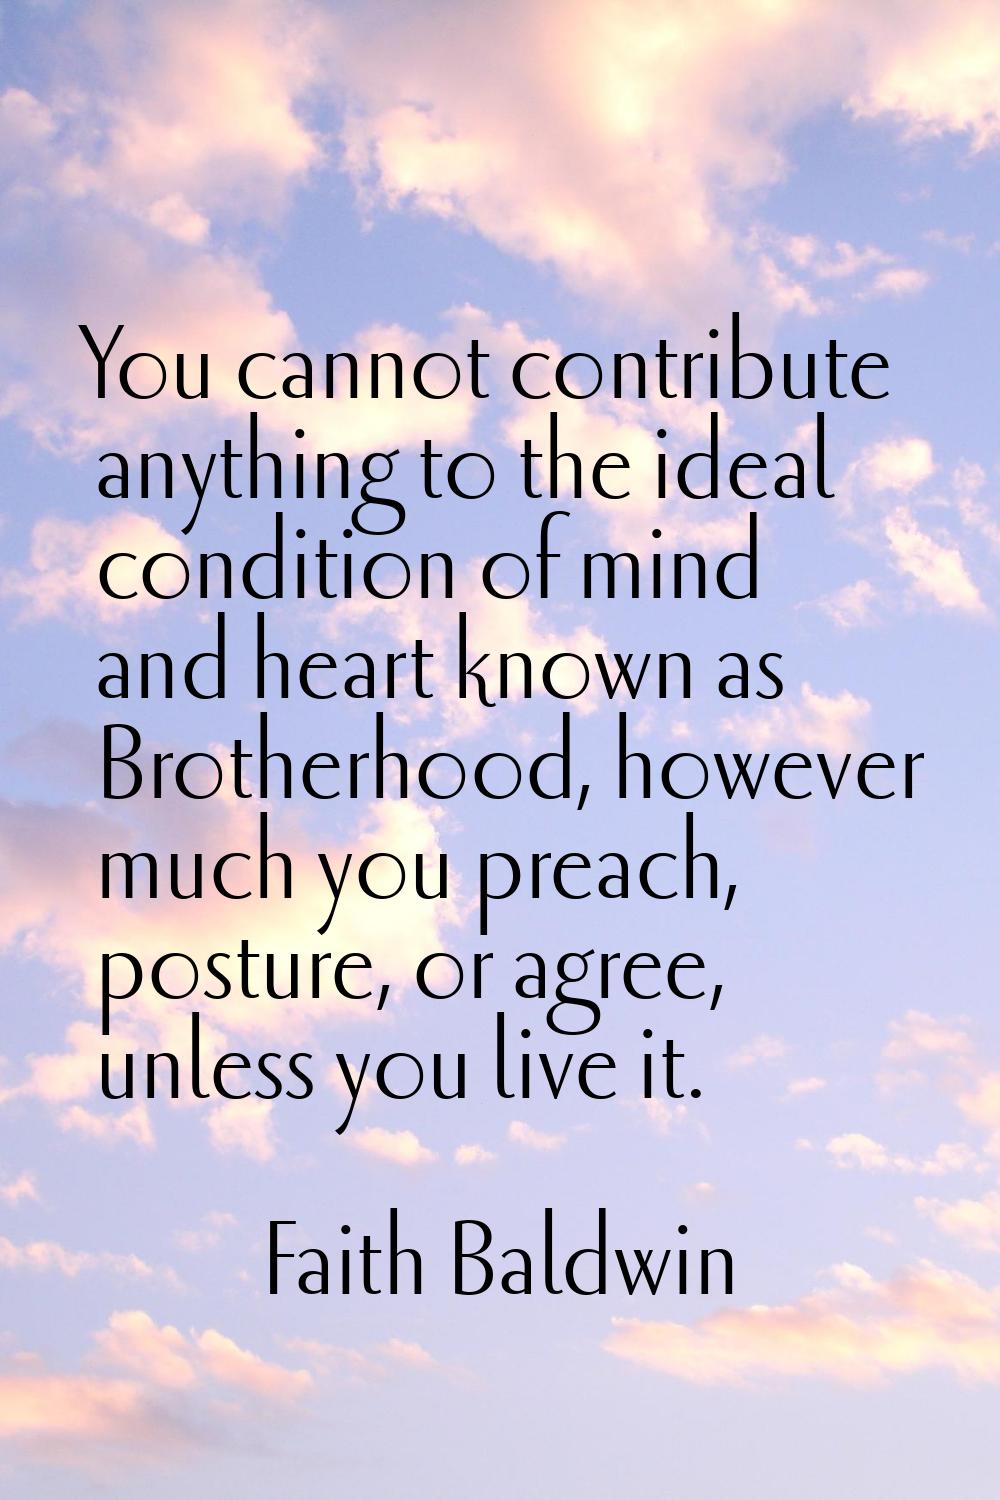 You cannot contribute anything to the ideal condition of mind and heart known as Brotherhood, howev